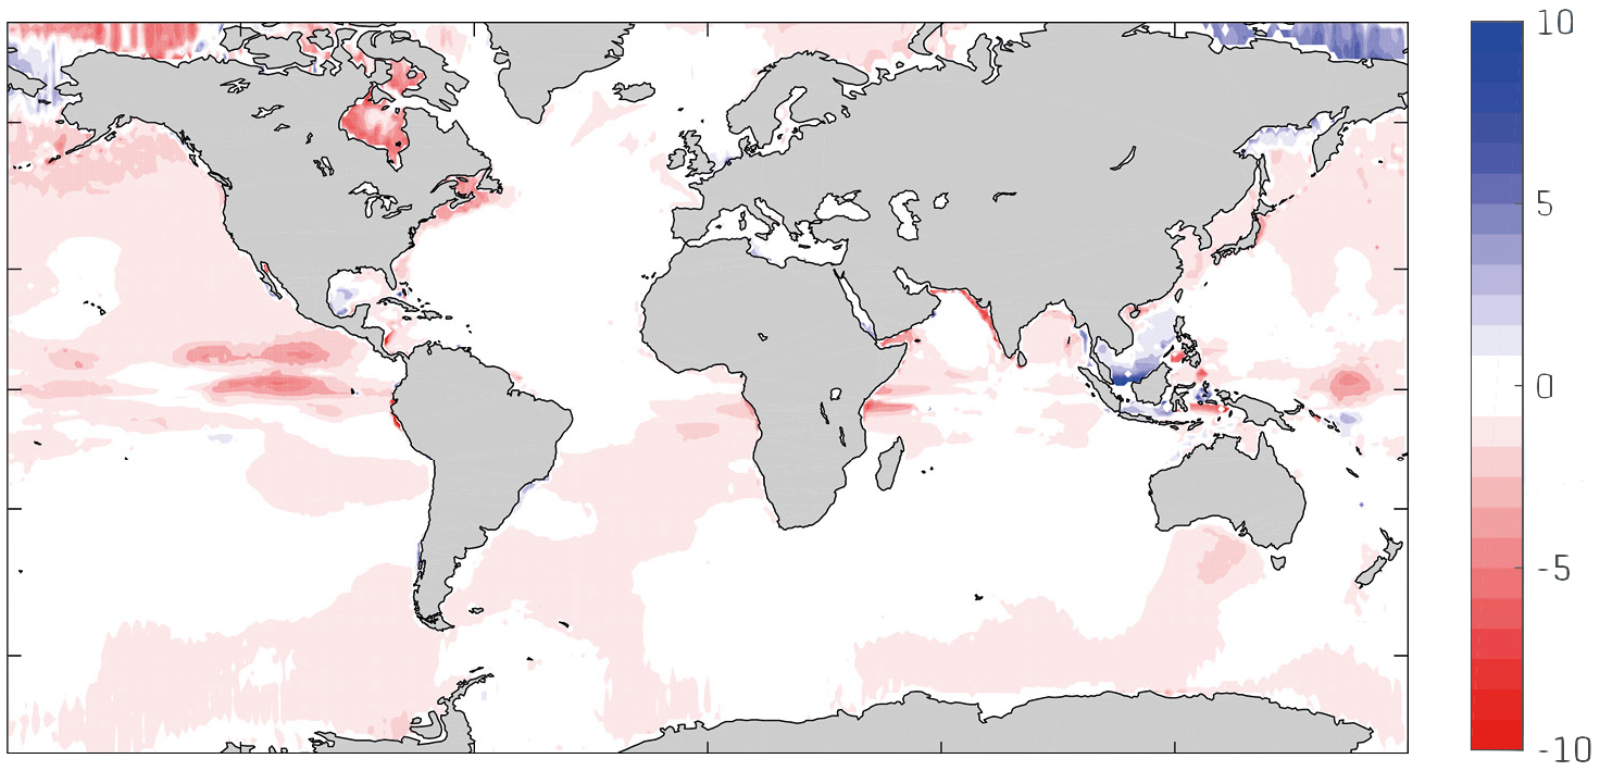 A world map of the warming oceans.